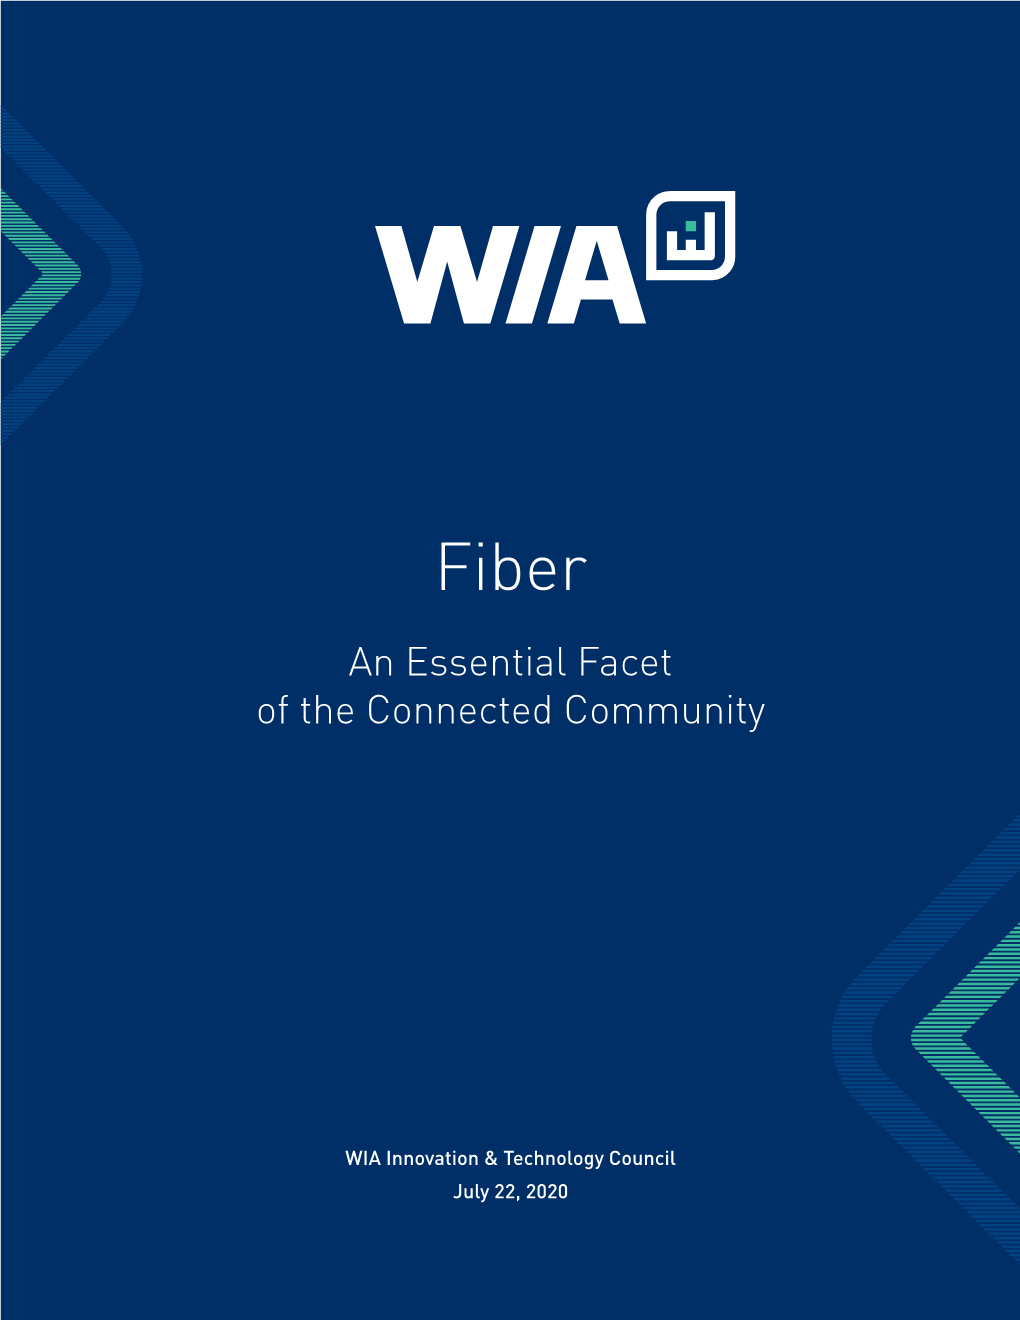 Fiber an Essential Facet of the Connected Community